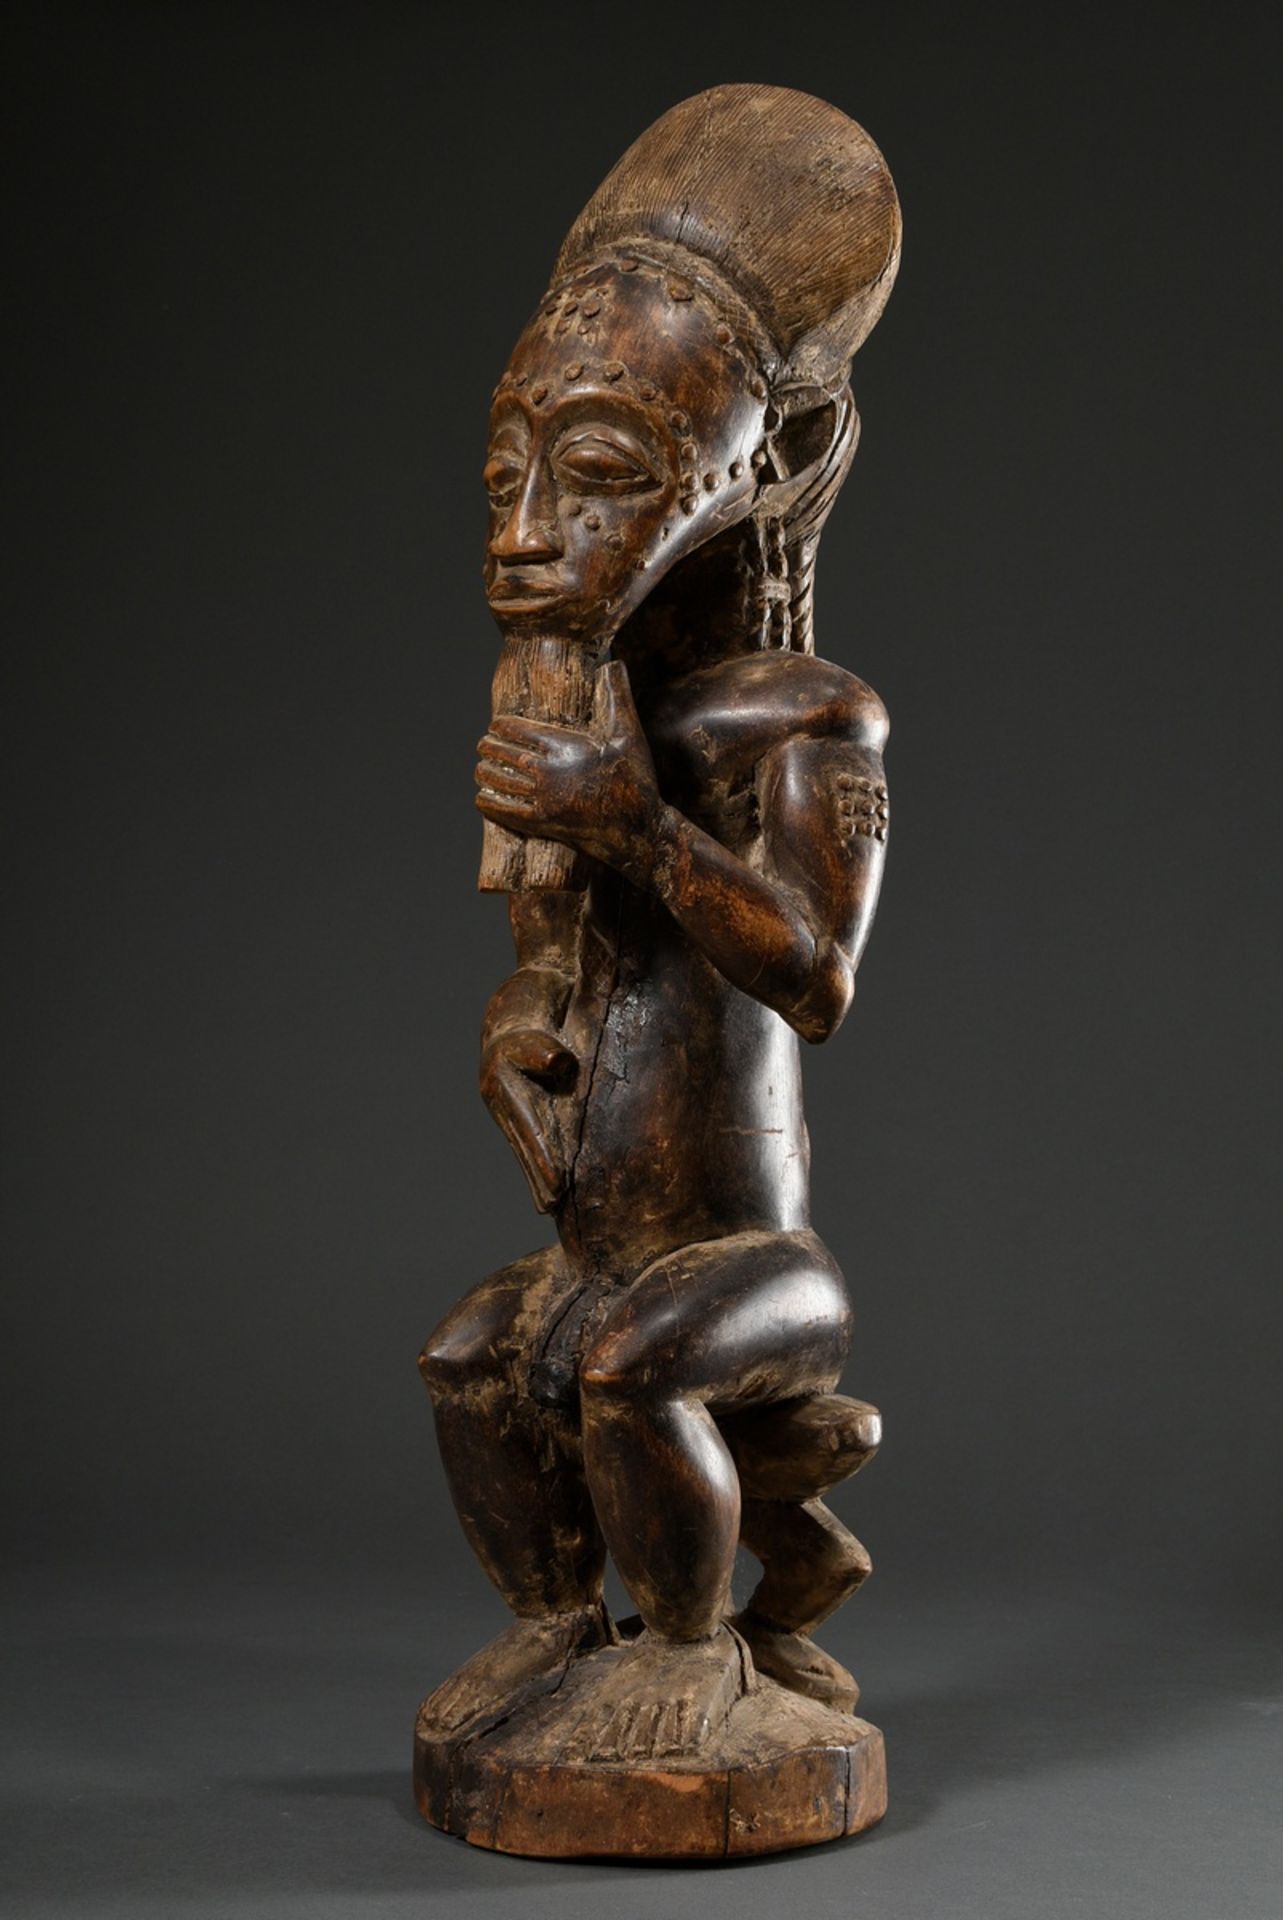 Male African ancestor figure "Blolo bian" with scarifications, carved wood with remains of old pati - Image 3 of 9